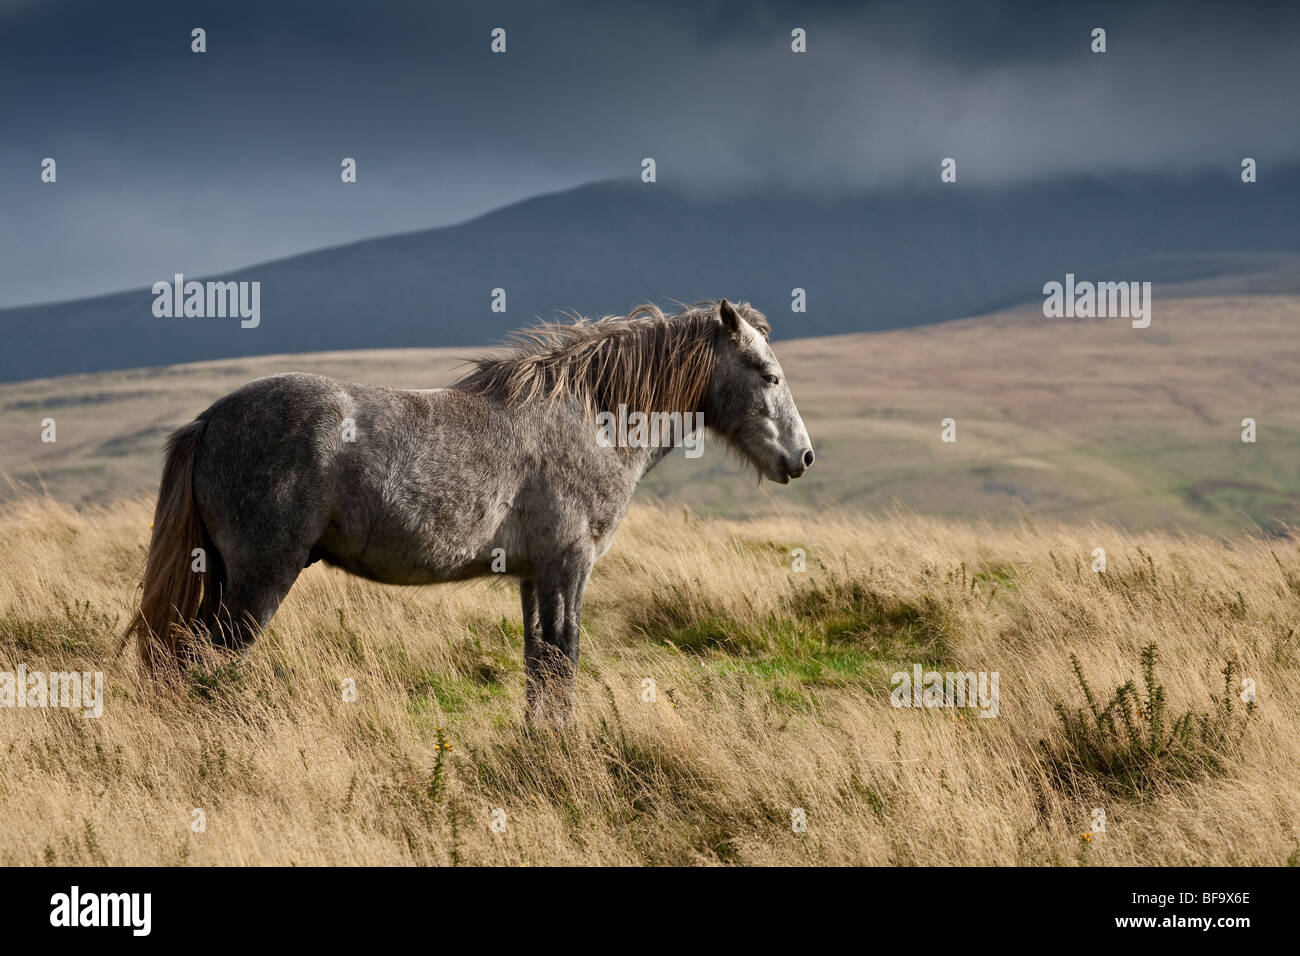 GREY WELSH MOUNTAIN PONY AM BERGHANG BRECON BEACONS NATIONAL PARK SOUTH WALES, AUSTRALIA Stockfoto